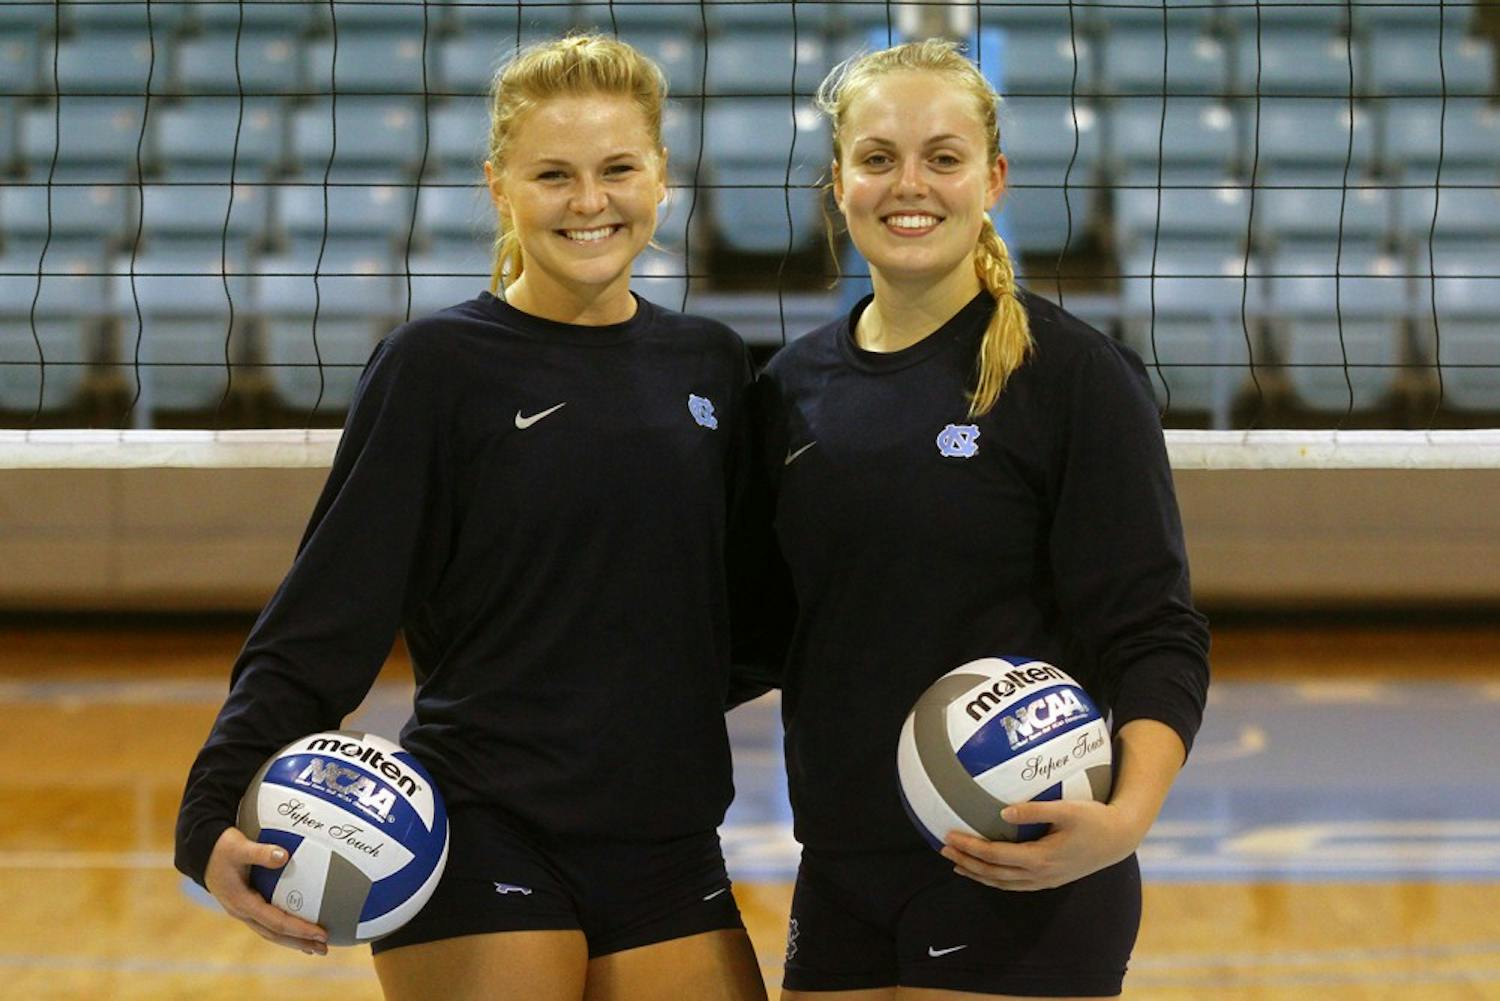 Jordyn Schnabl and Abigail Curry pose for a photo after practice Wednesday night.